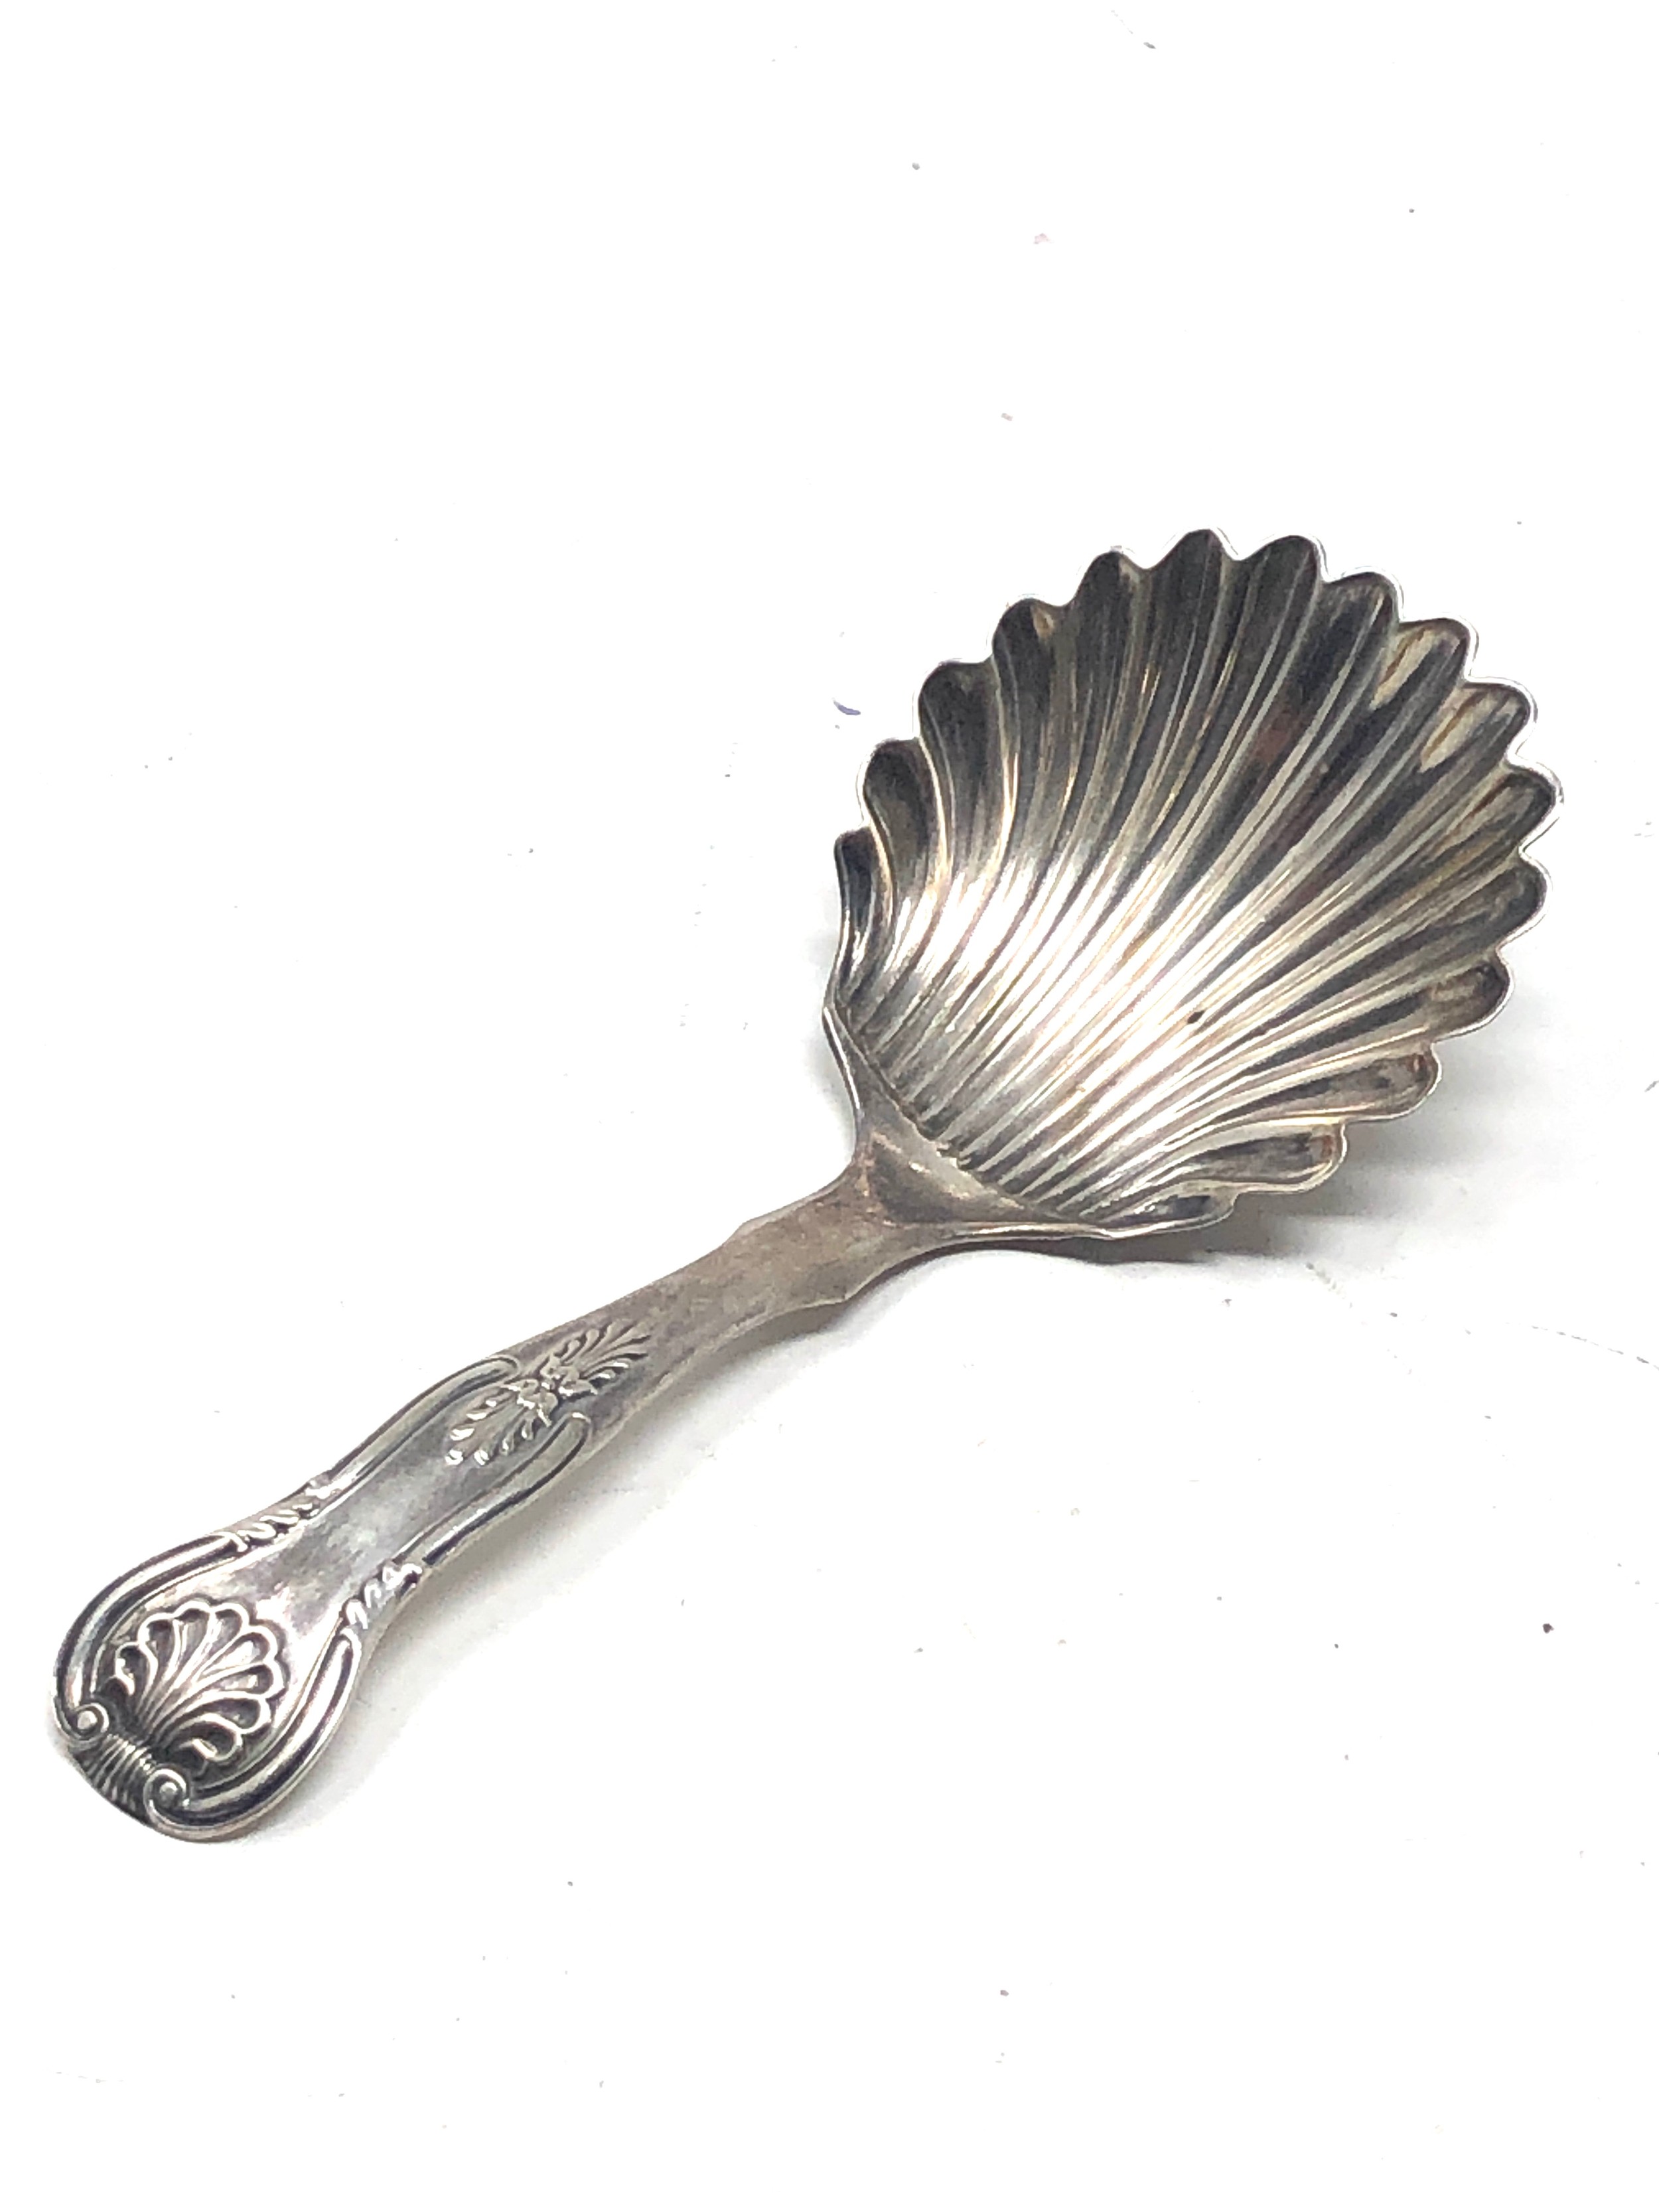 Antique scottish silver tea caddy spoon - Image 2 of 4